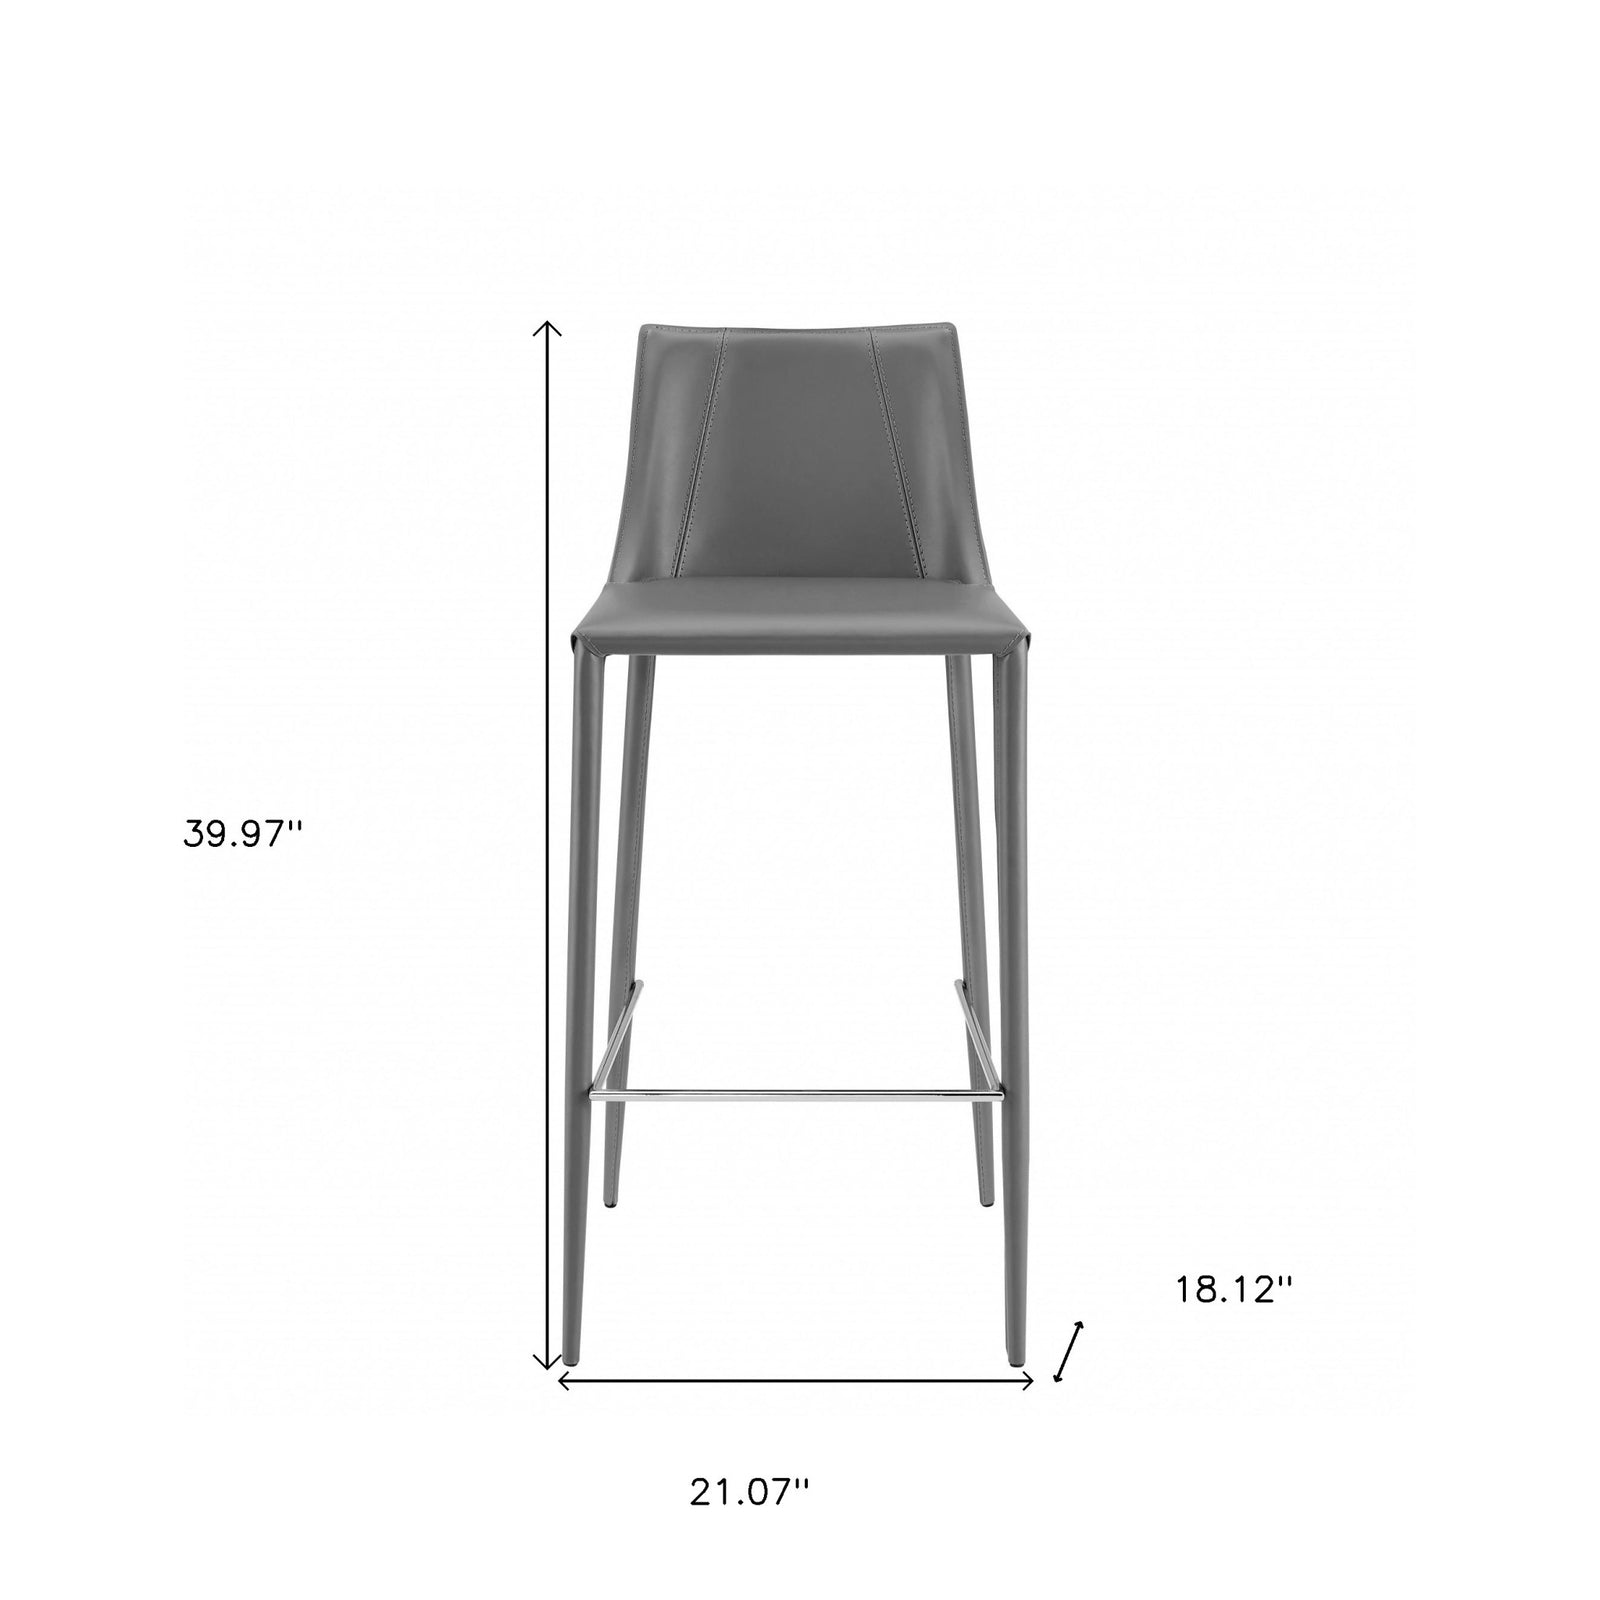 40" Gray Steel Low Back Bar Height Chair With Footrest